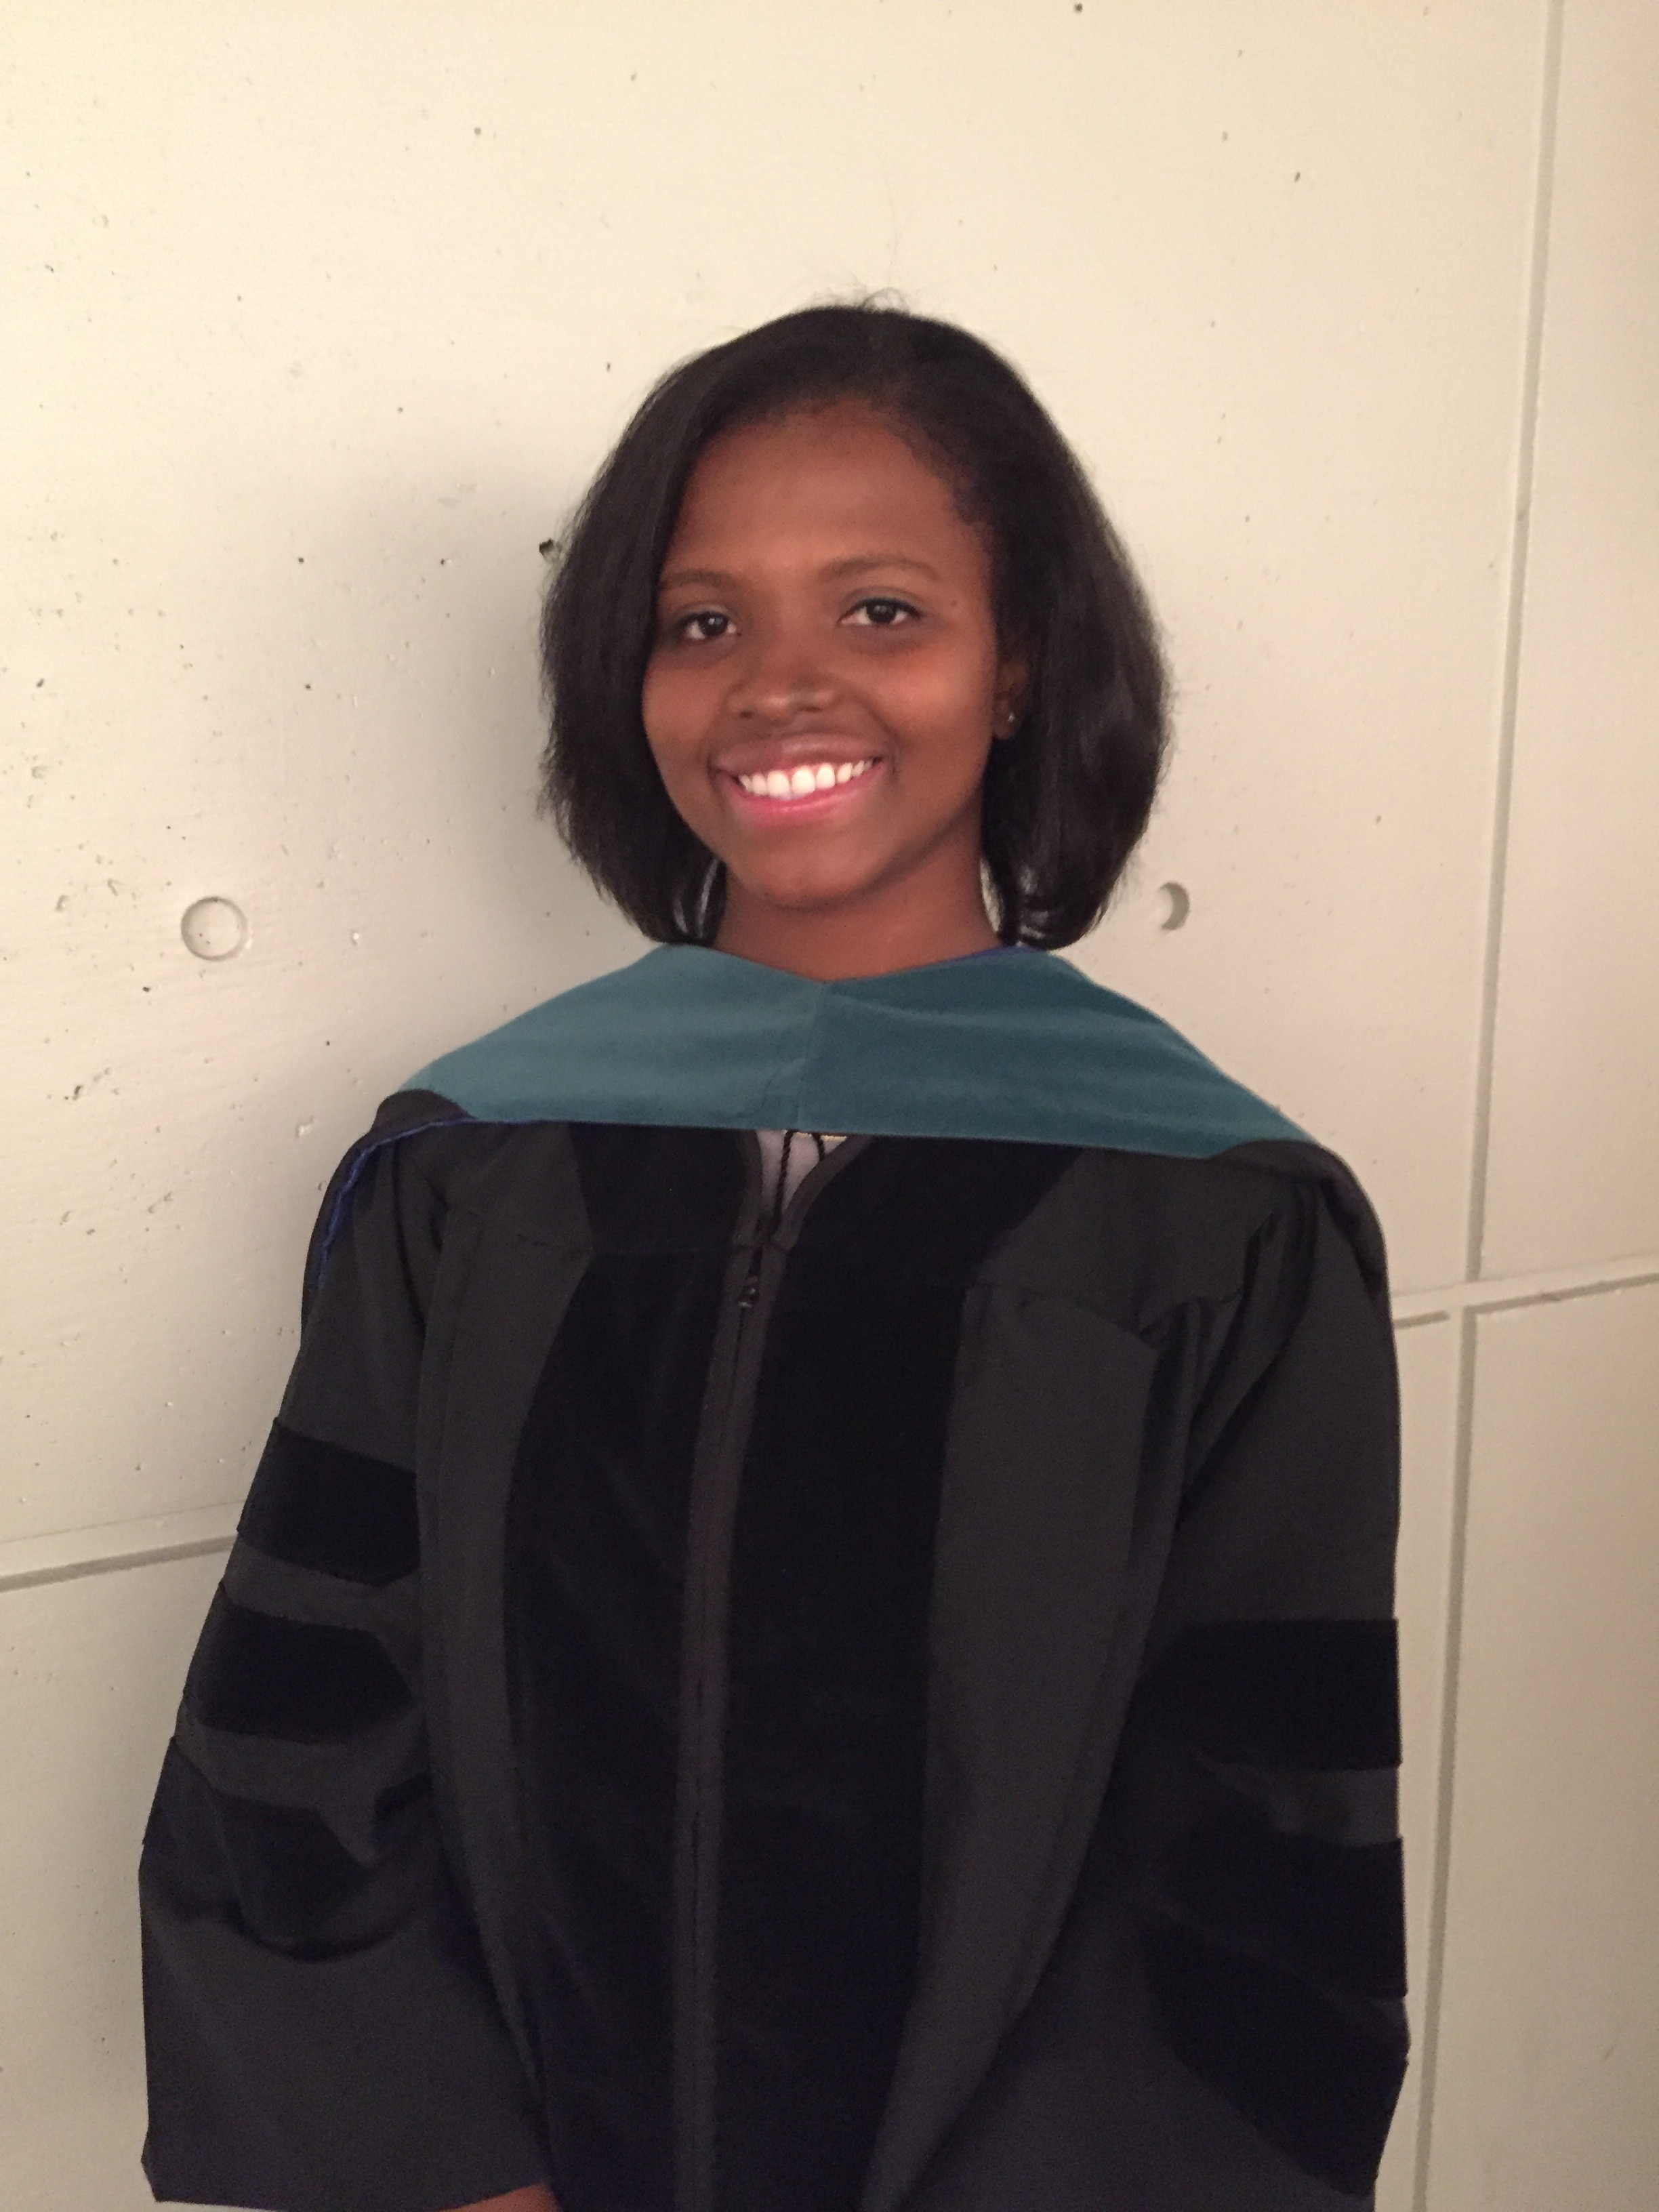 Vanessa Volmar, class of 2016, graduate of the School of Health Sciences Doctor of Physical Therapy Program